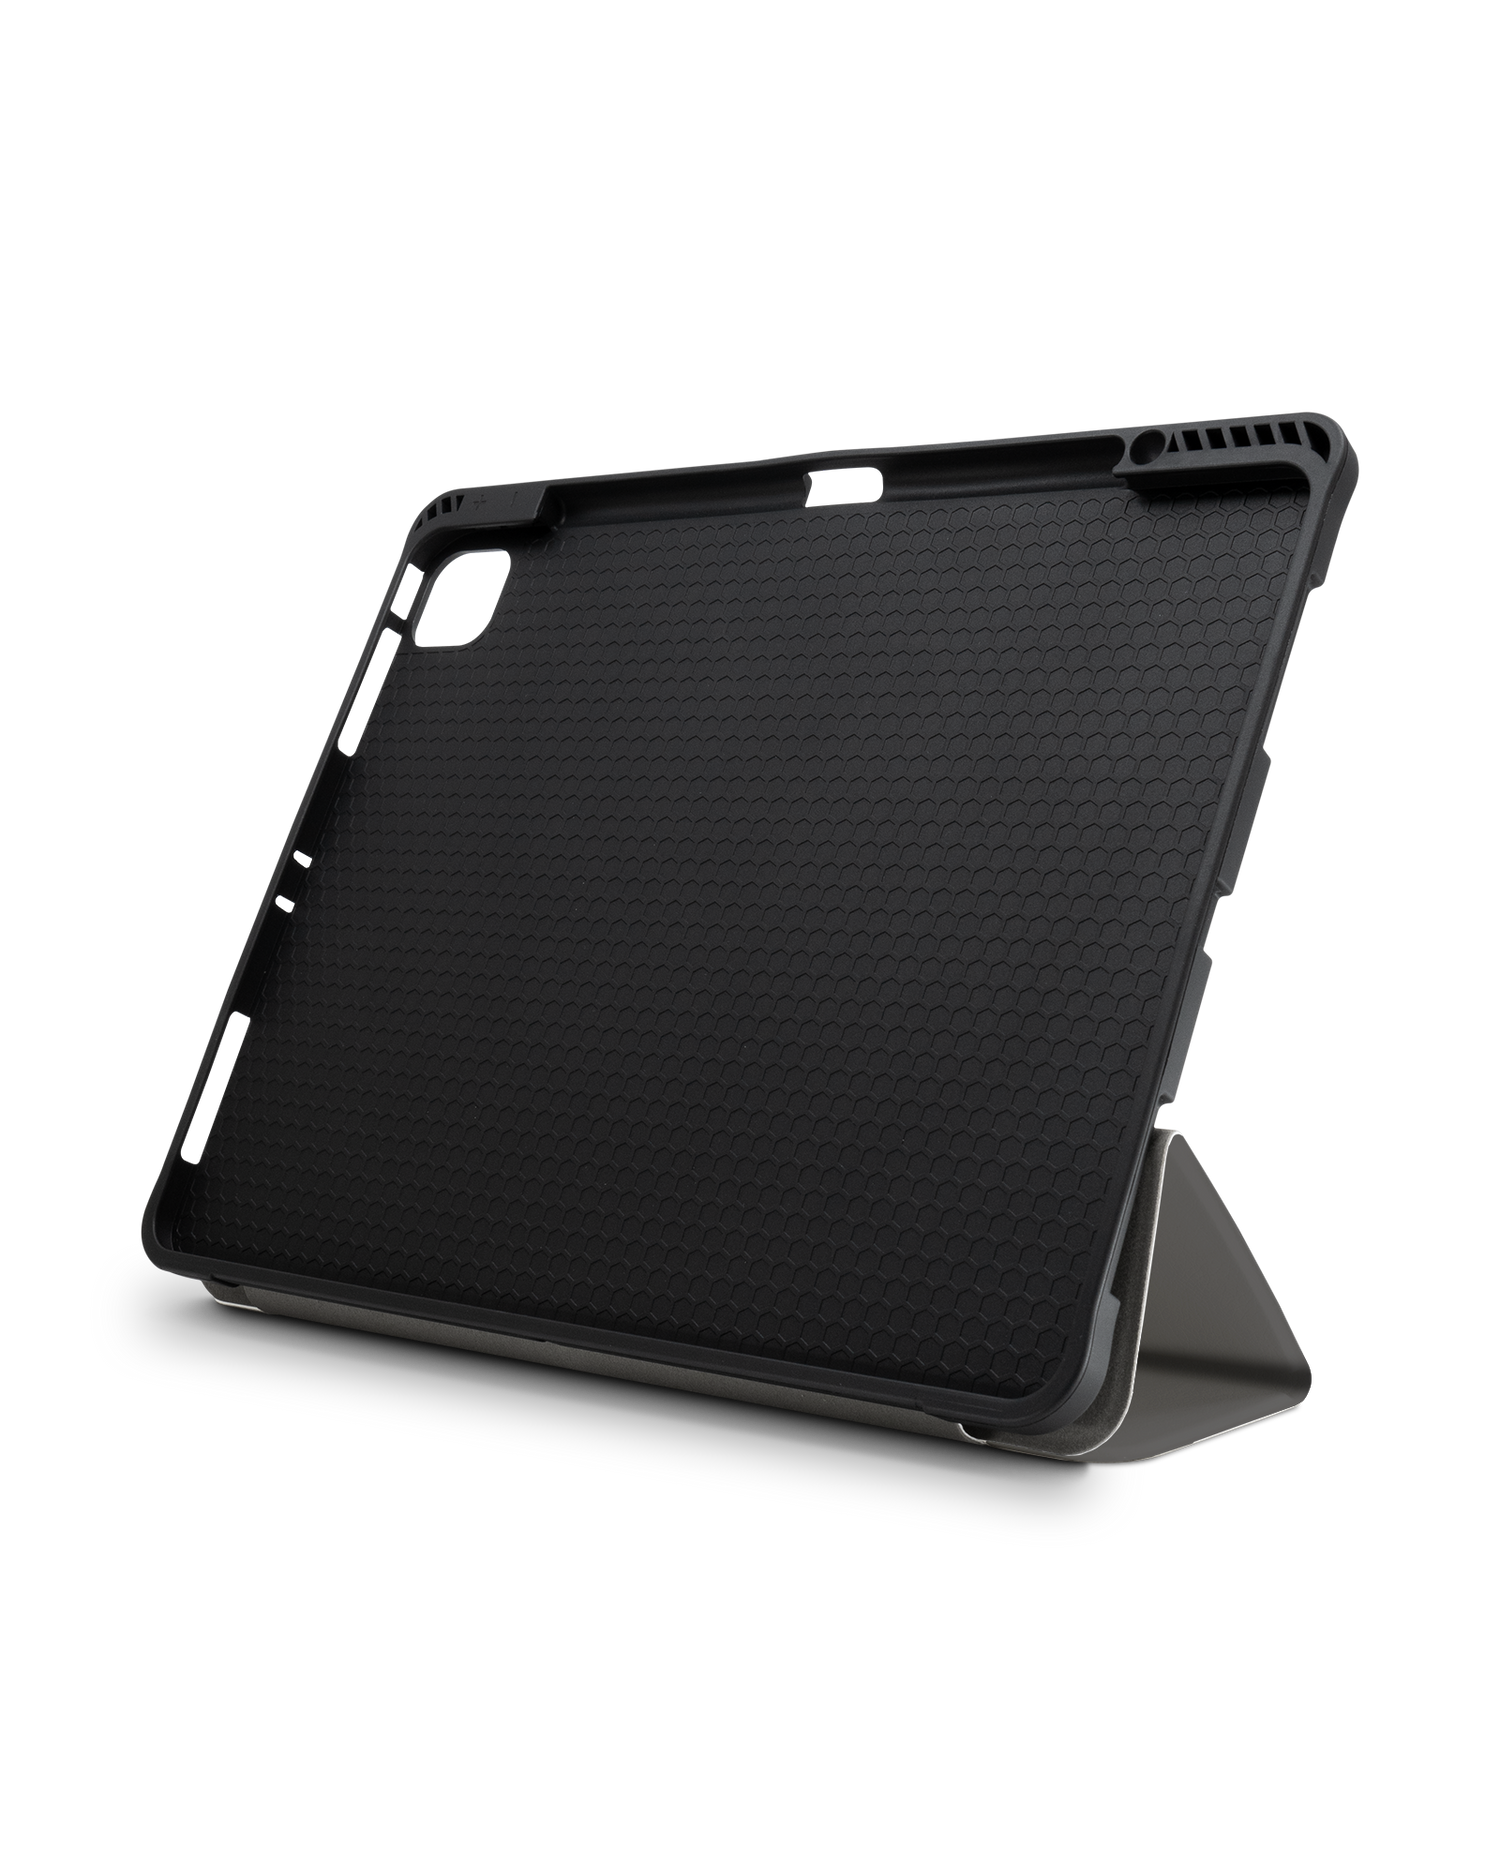 SPACE GREY iPad Case with Pencil Holder for Apple iPad Pro 6 12.9